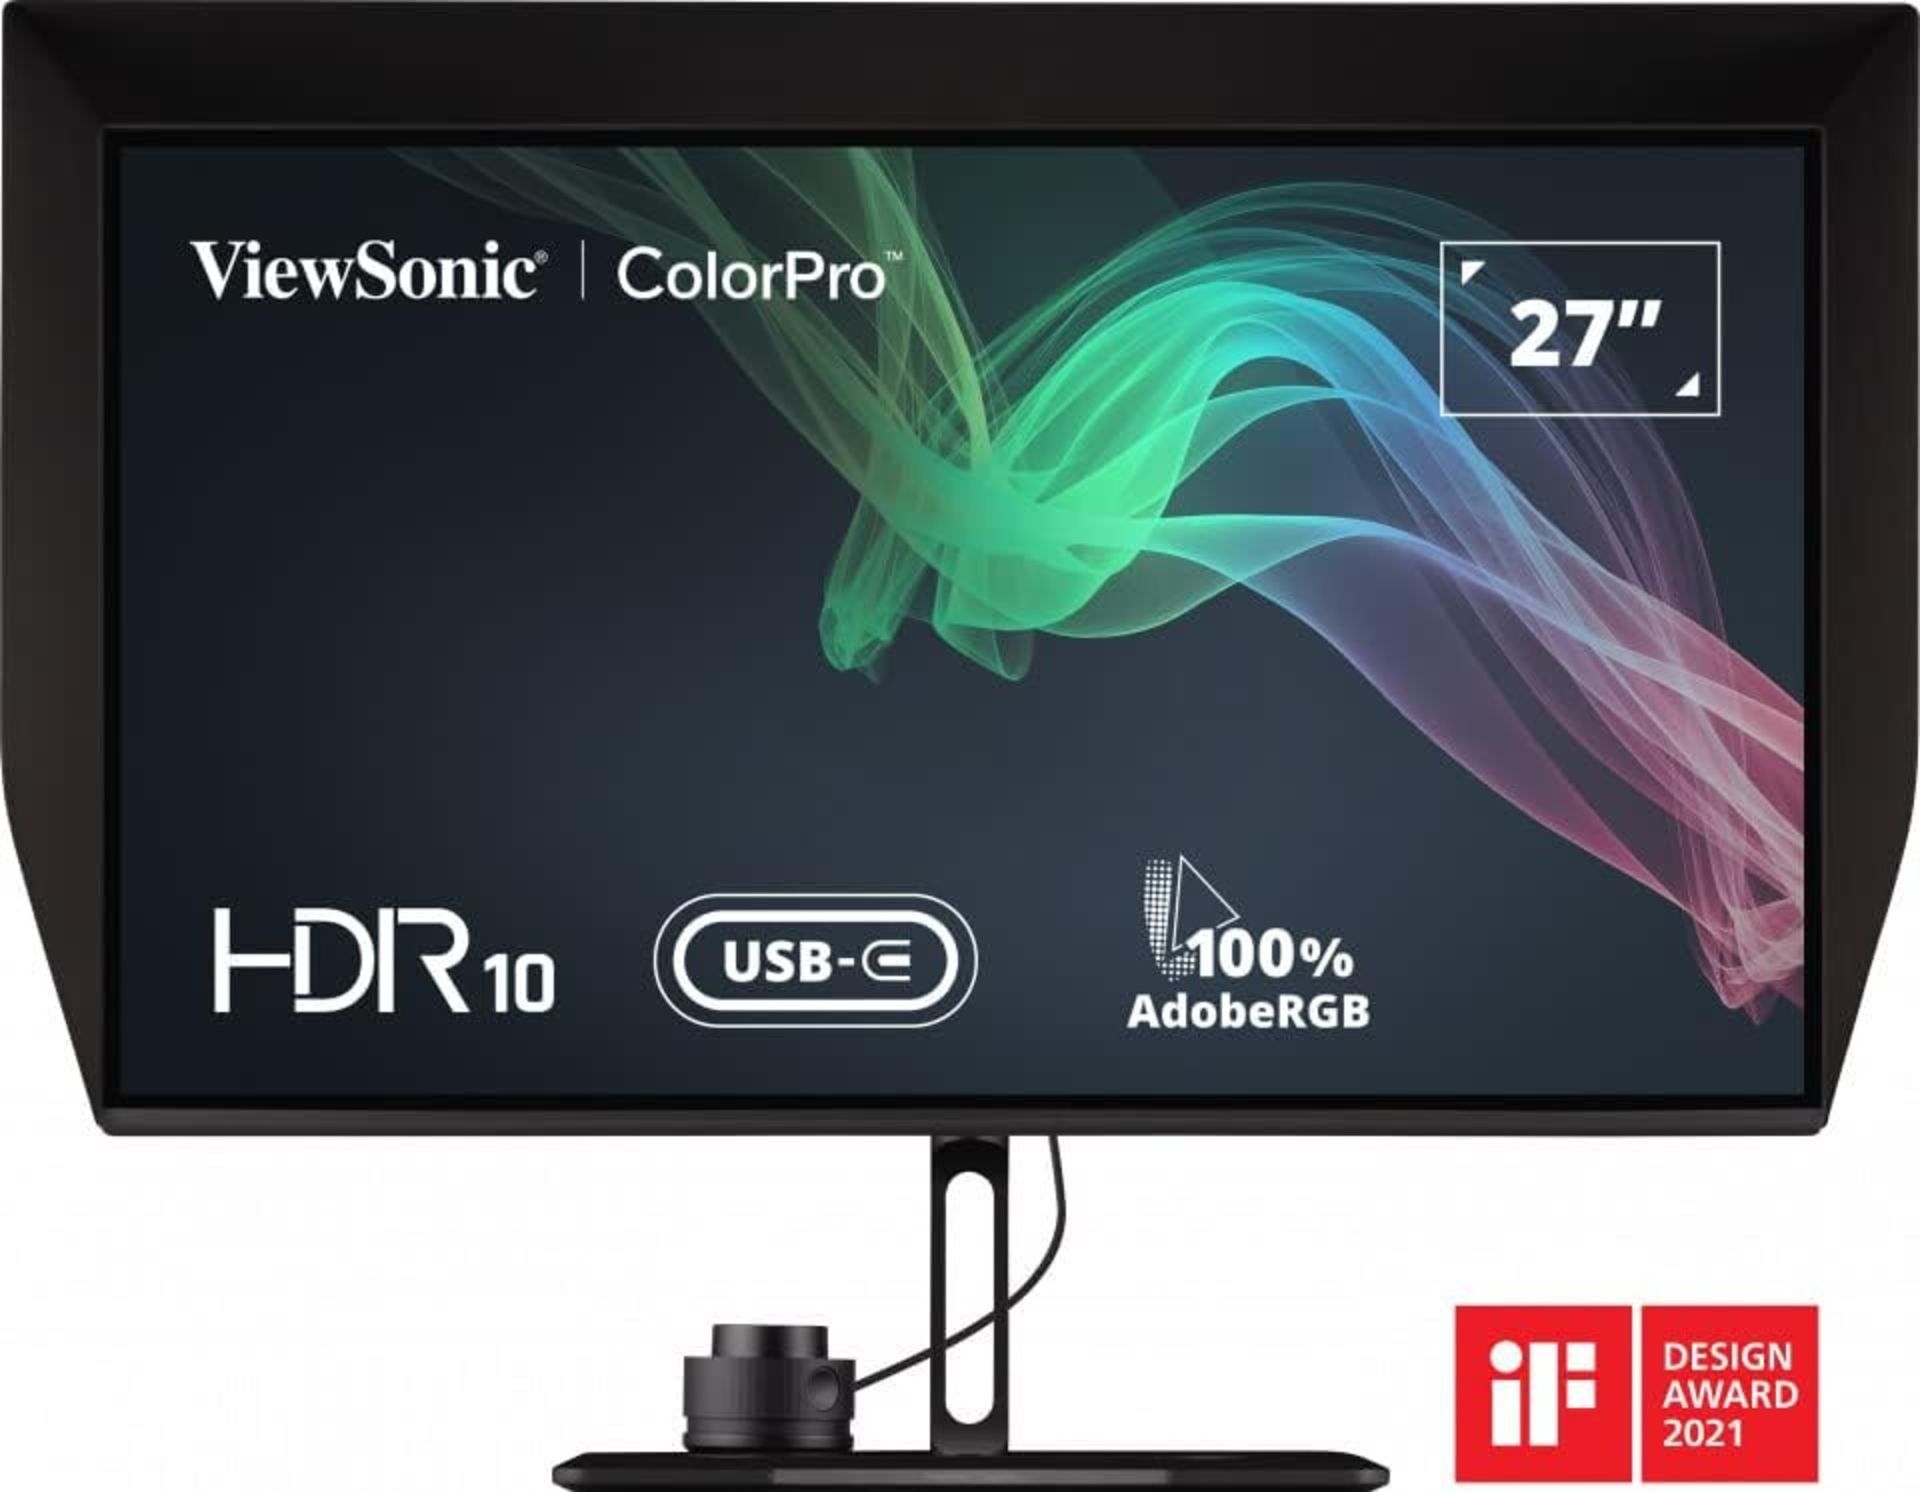 BRAND NEW FACTORY SEALED VIEWSONIC VP2786-4K ColorPro 27-inch IPS 4K UHD Monitor. RRP £1028. (PCK4). - Image 2 of 7